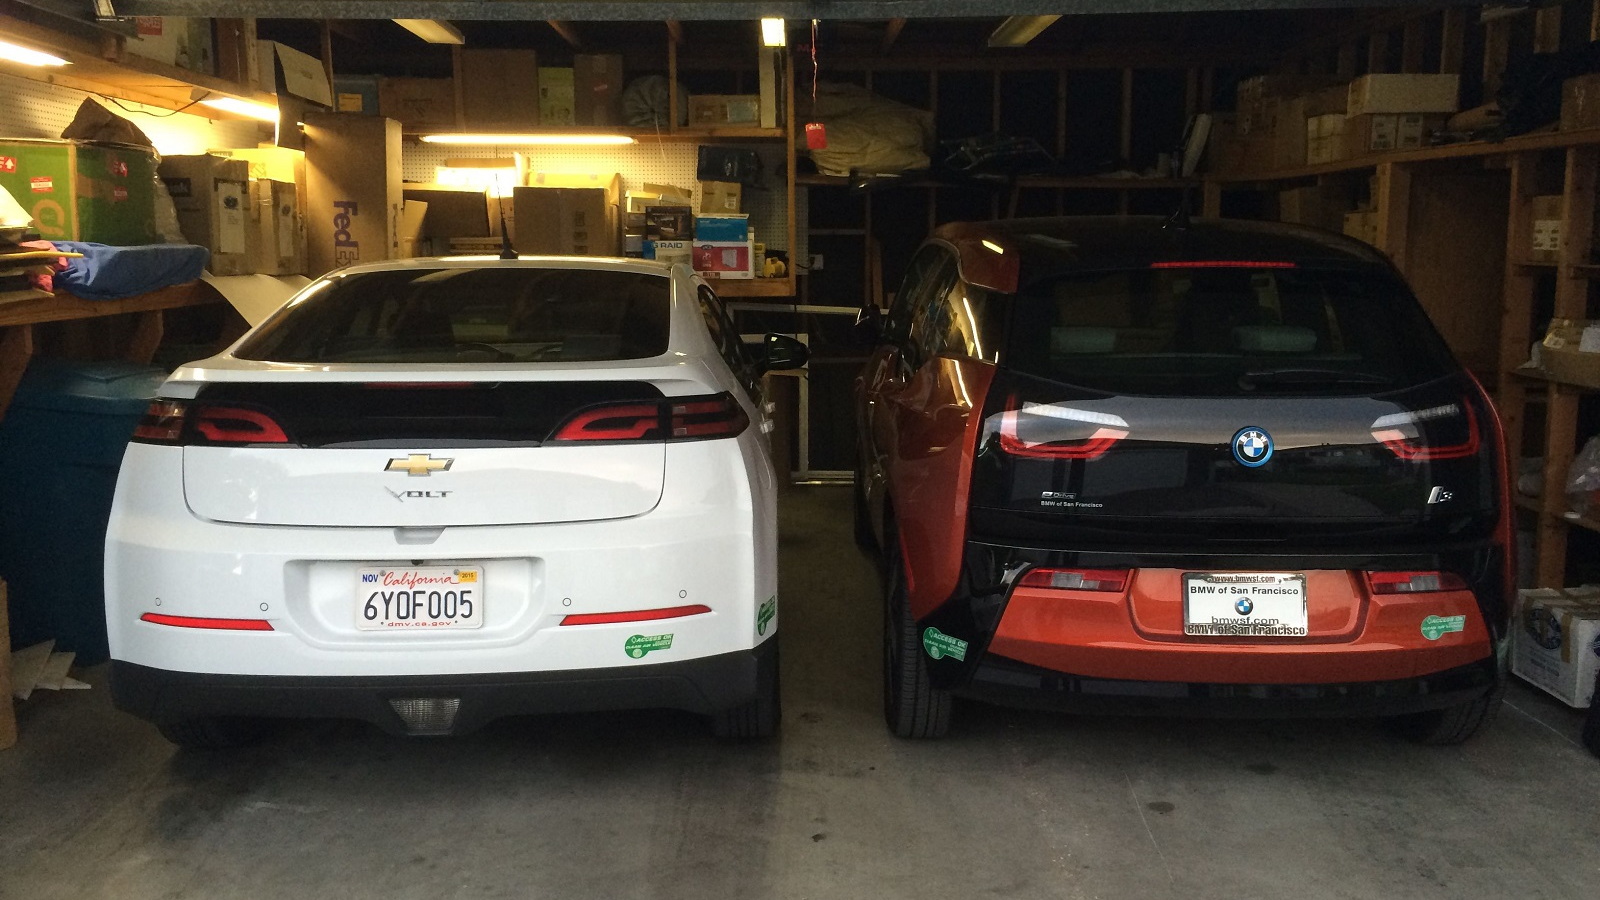 2013 Chevrolet Volt and its replacement, 2015 BMW i3 REx  [photo: Jeff Pantukhoff]